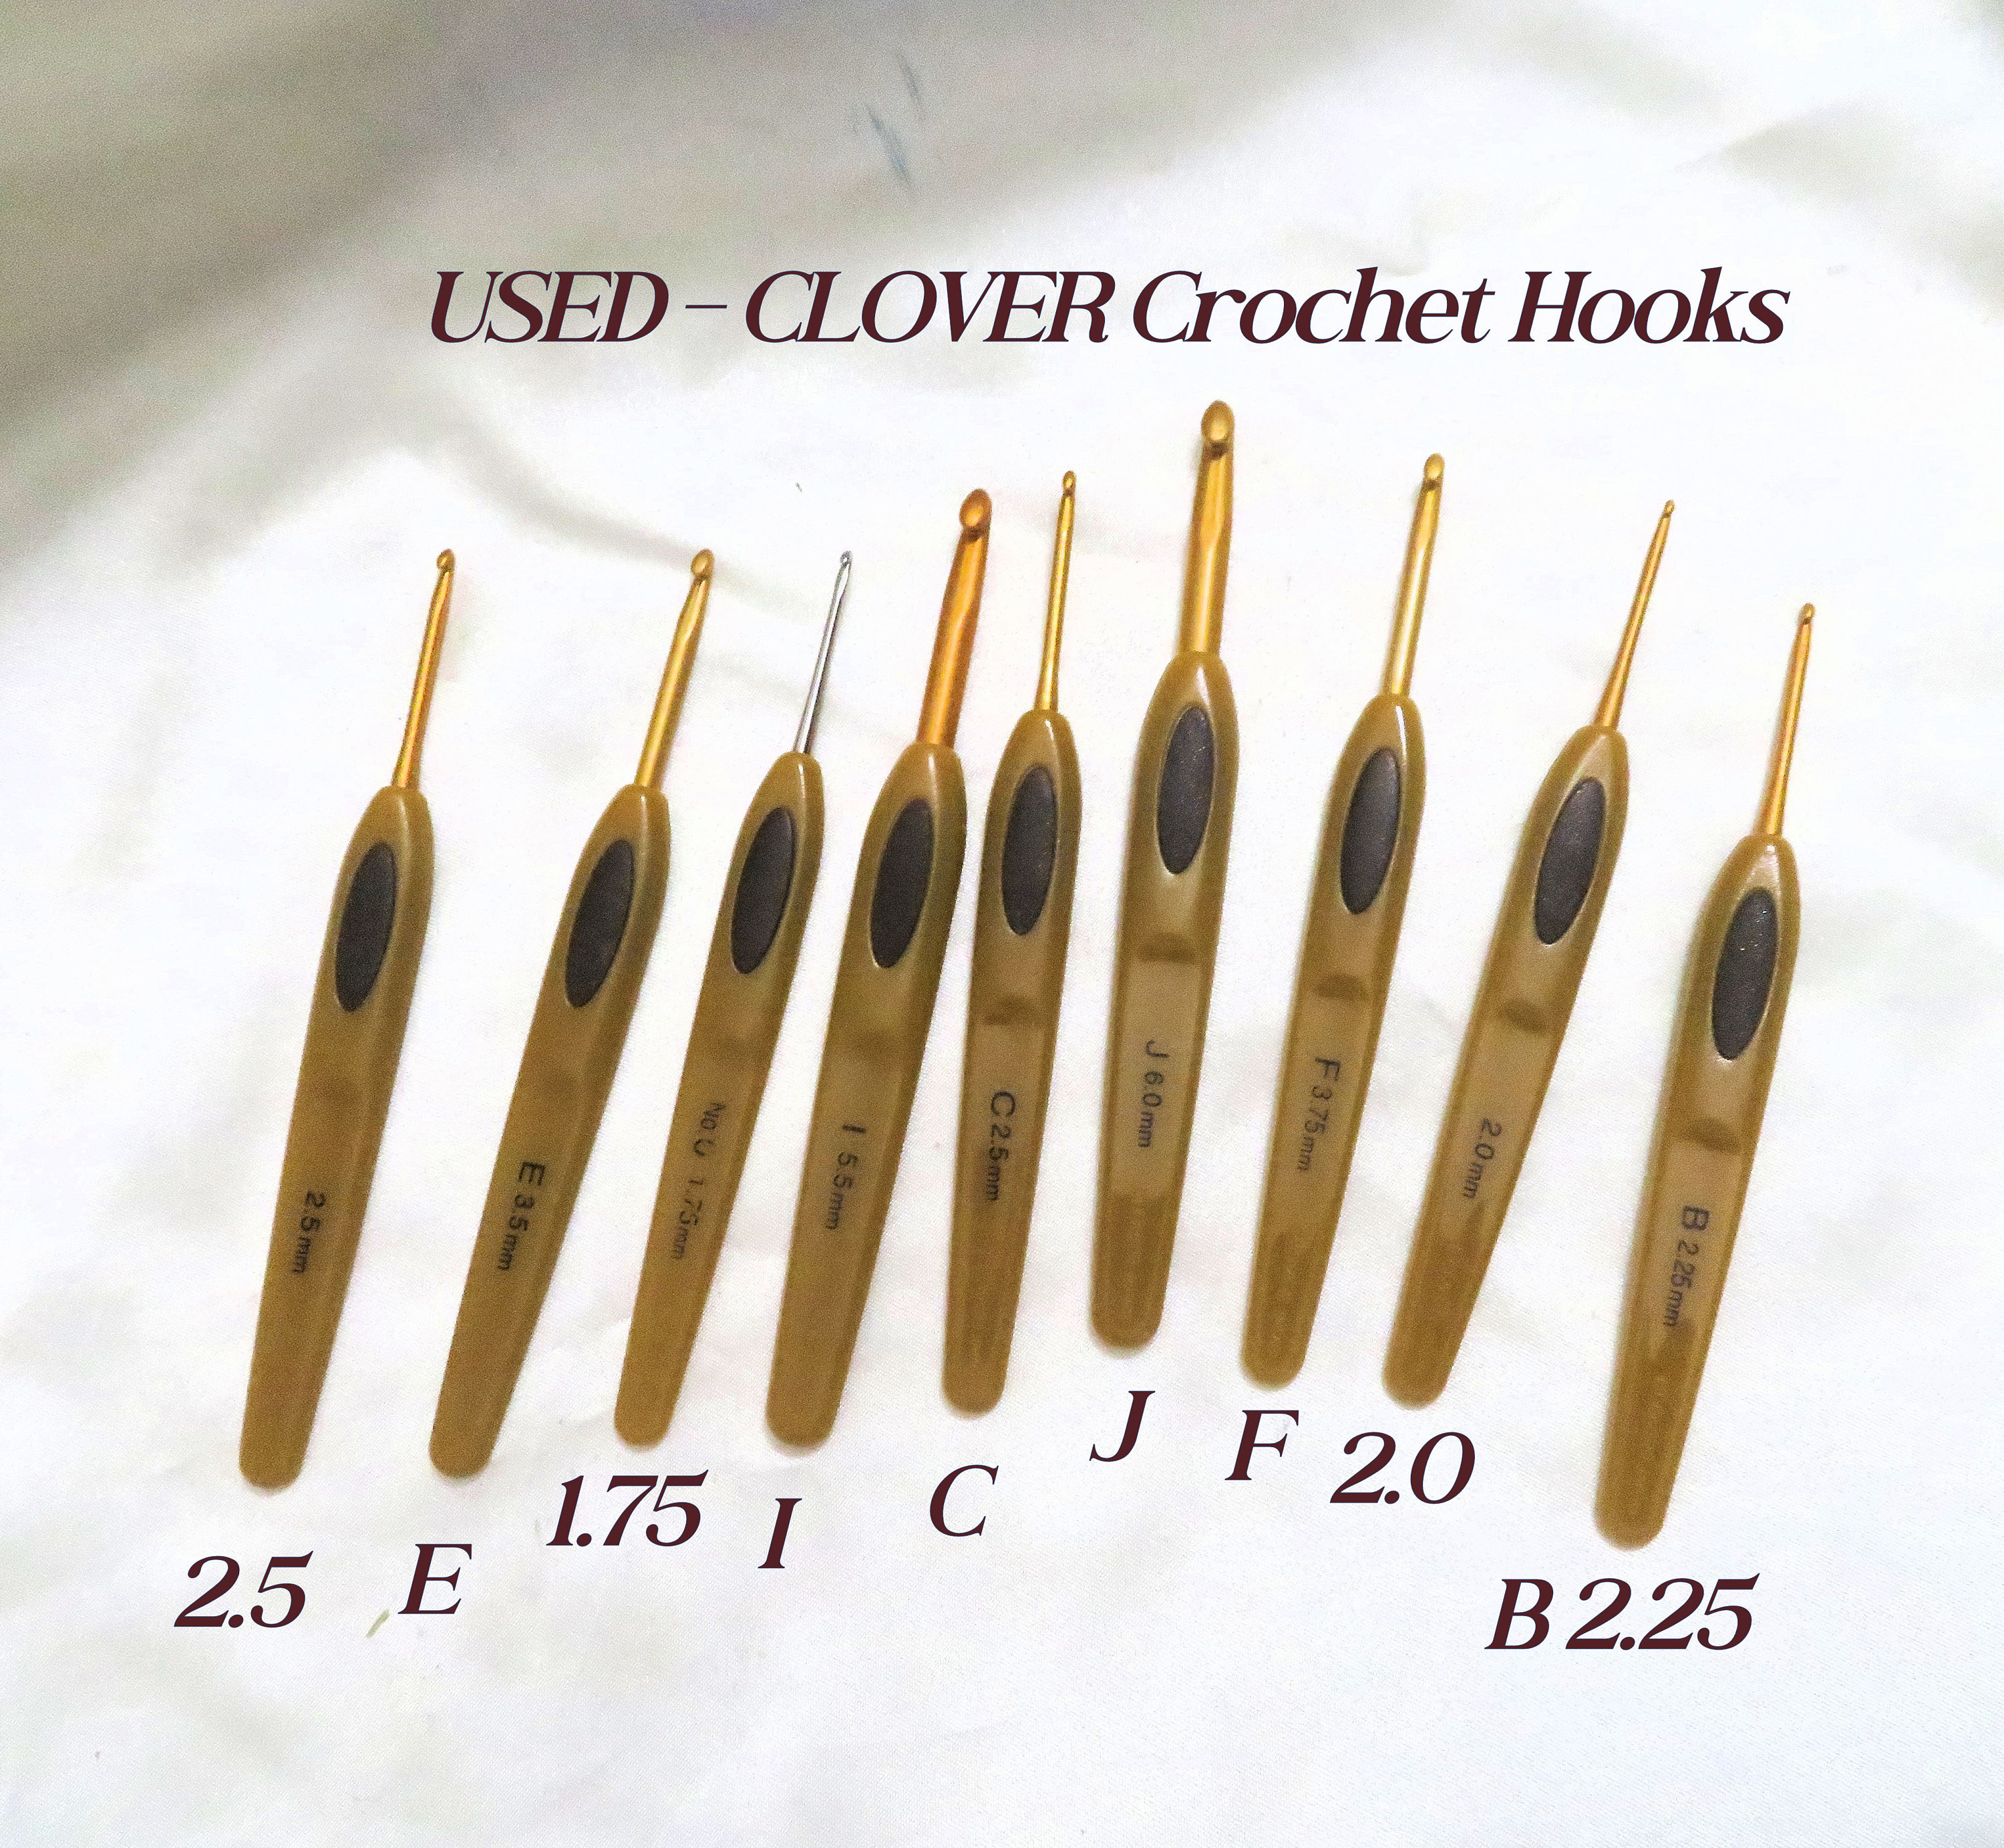 SOFT TOUCH Clover Crochet Hooks Used Different Sizes Available -  UK